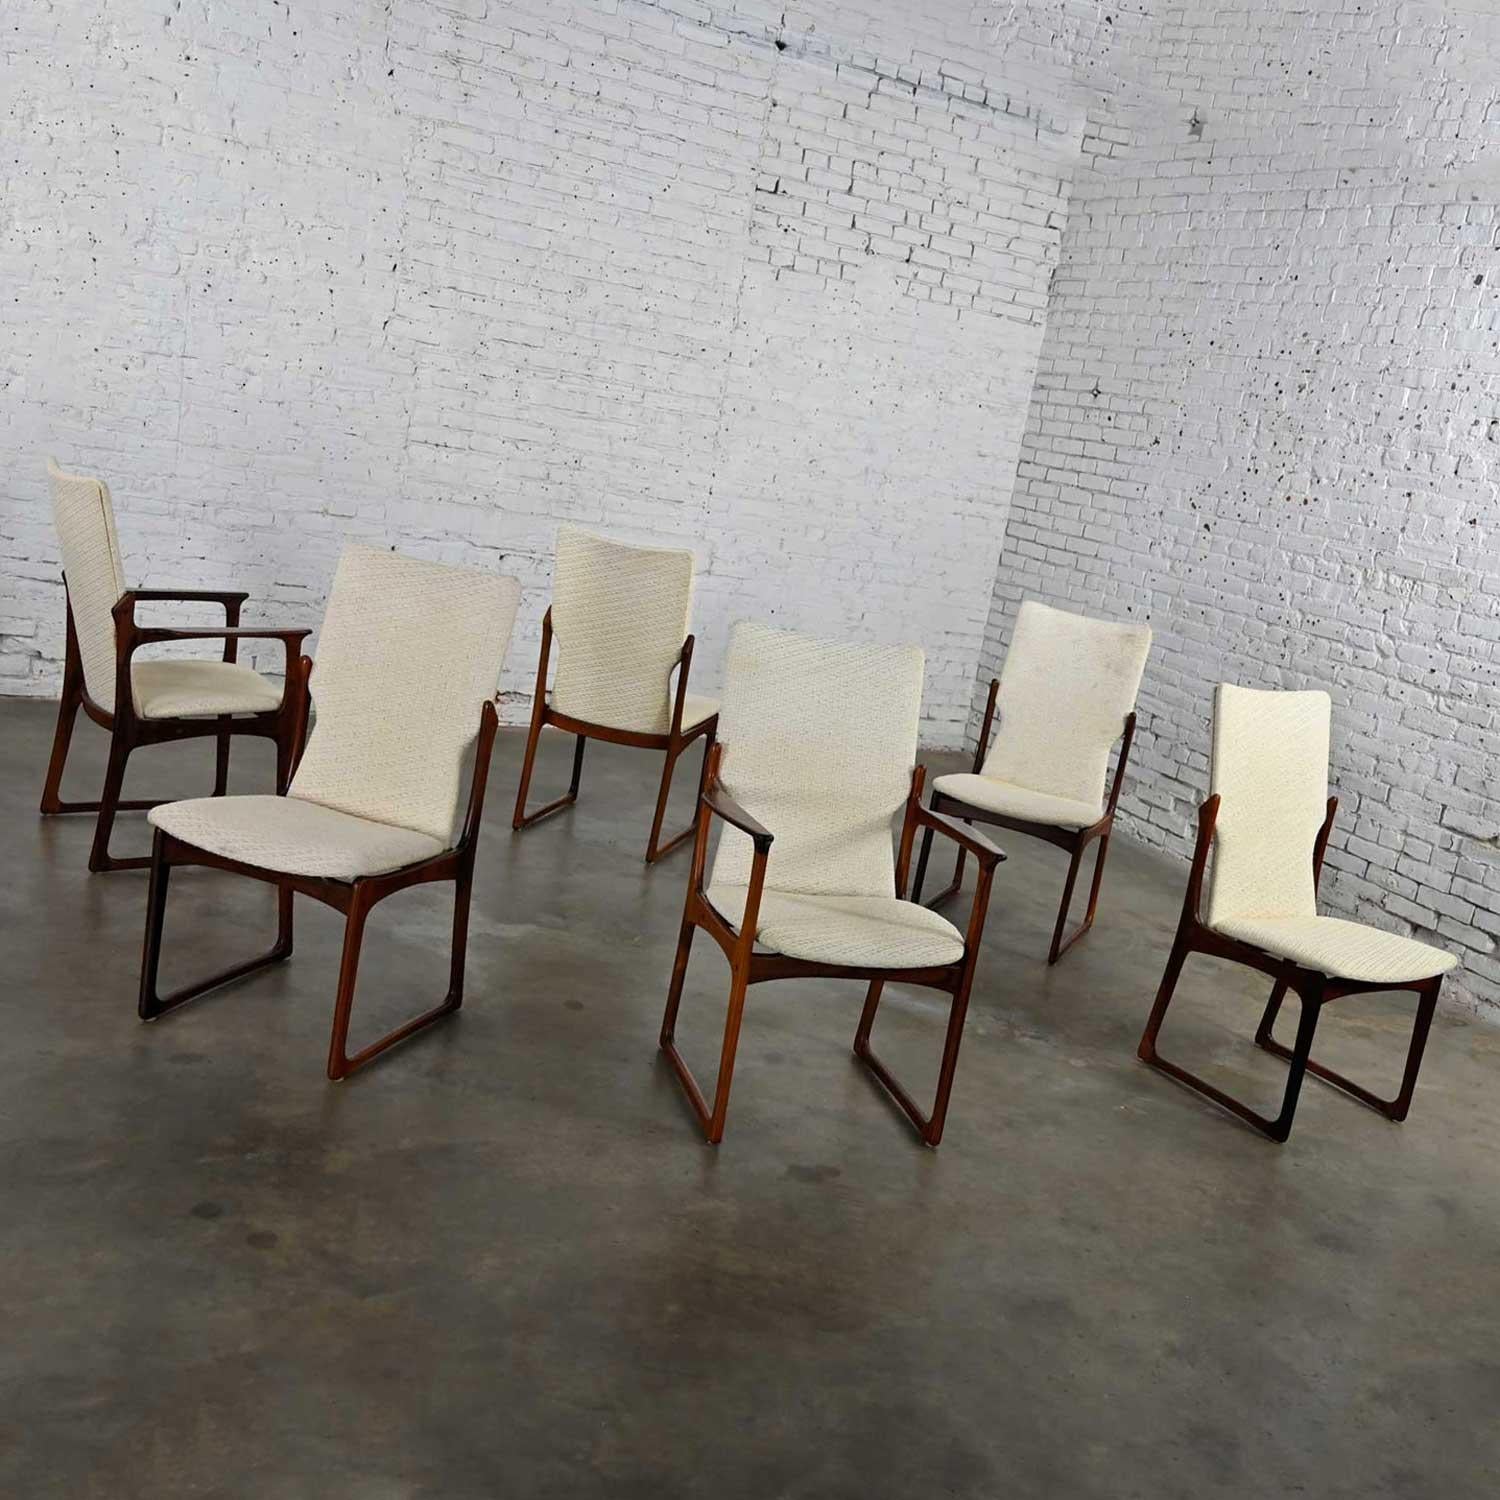 Fabulous Scandinavian modern Danish rosewood dining chairs by Art Furn including 4 side and 2 armchairs, set of 6. Comprised of solid rosewood and a nubby off-white fabric upholstery that show signs of the original fabric underneath. They have all